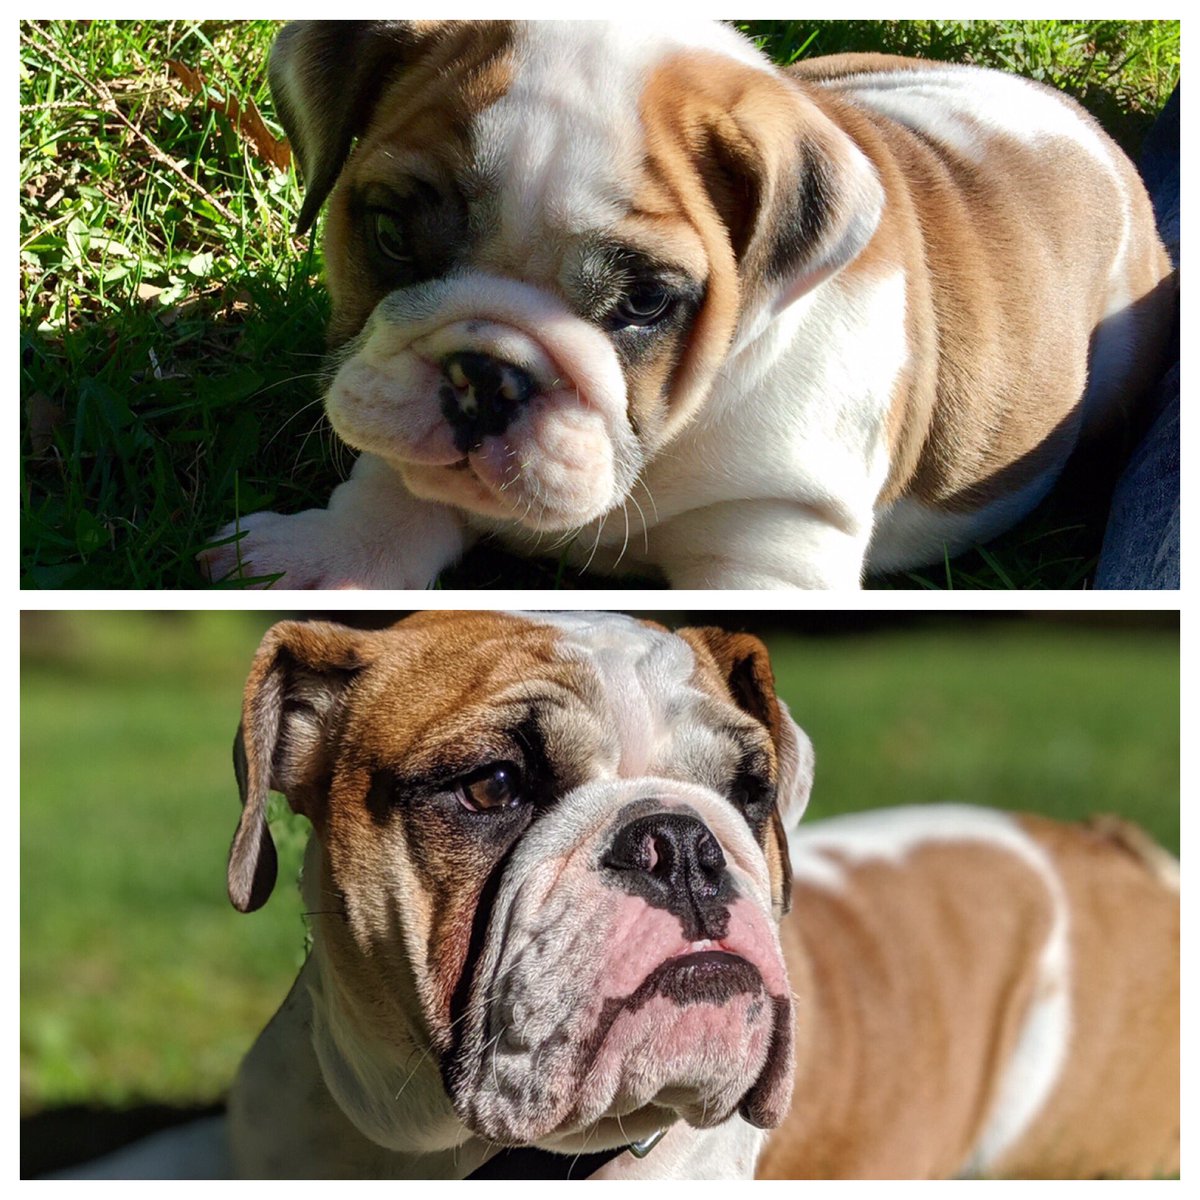 They grow so fast!😢 I went to change Trucks profile pic and here’s a then and now. Only 4 ½ months difference #theygrowsofast #bulldog #dogsoftwitter #beforeandafter